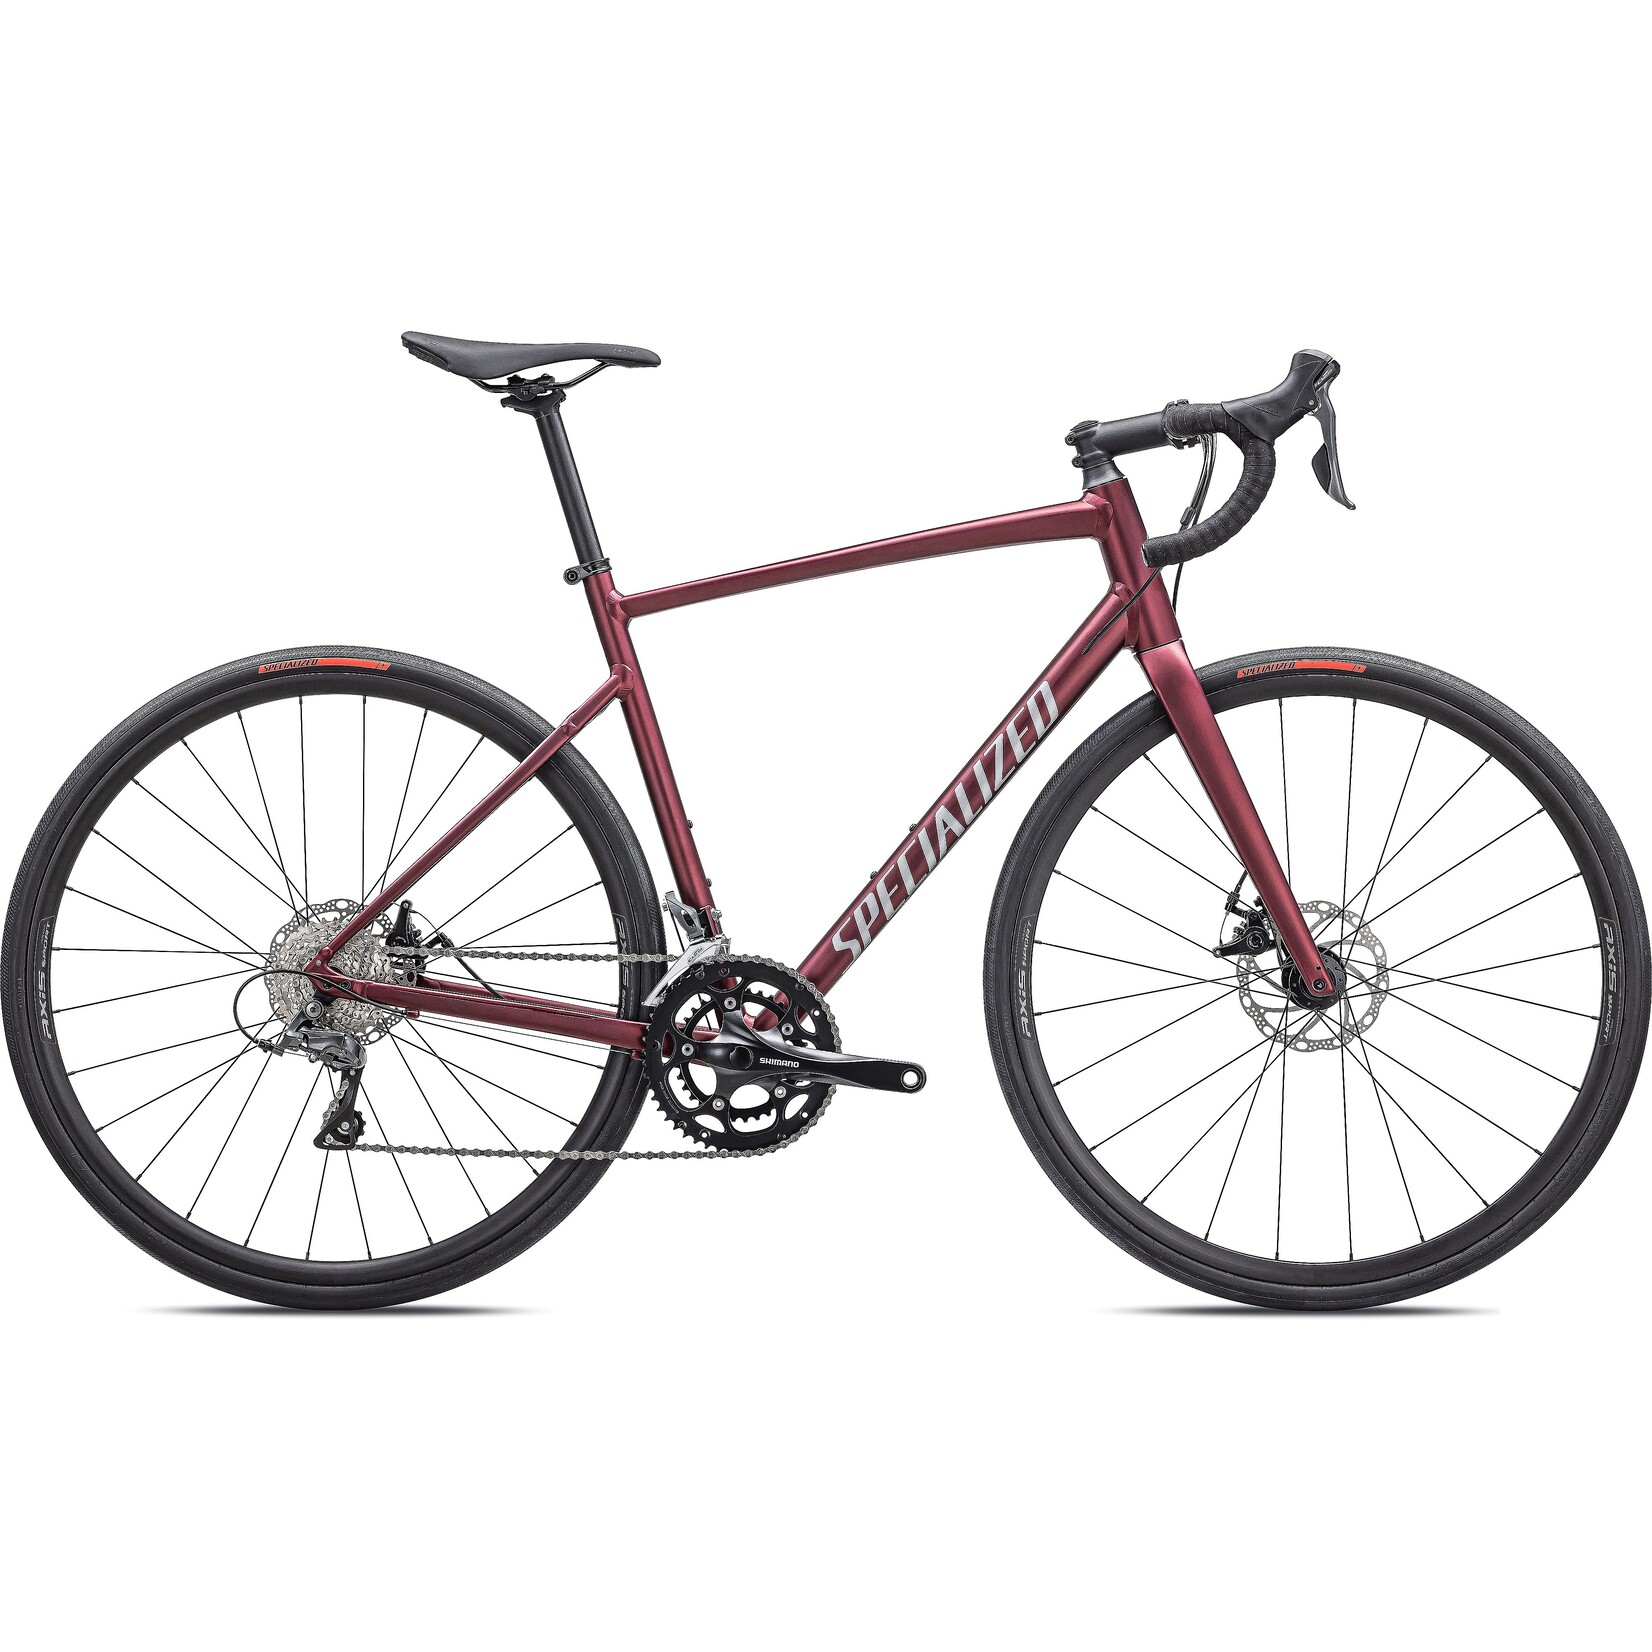 Specialized Allez in Satin Maroon/Silver Dust/Flo Red